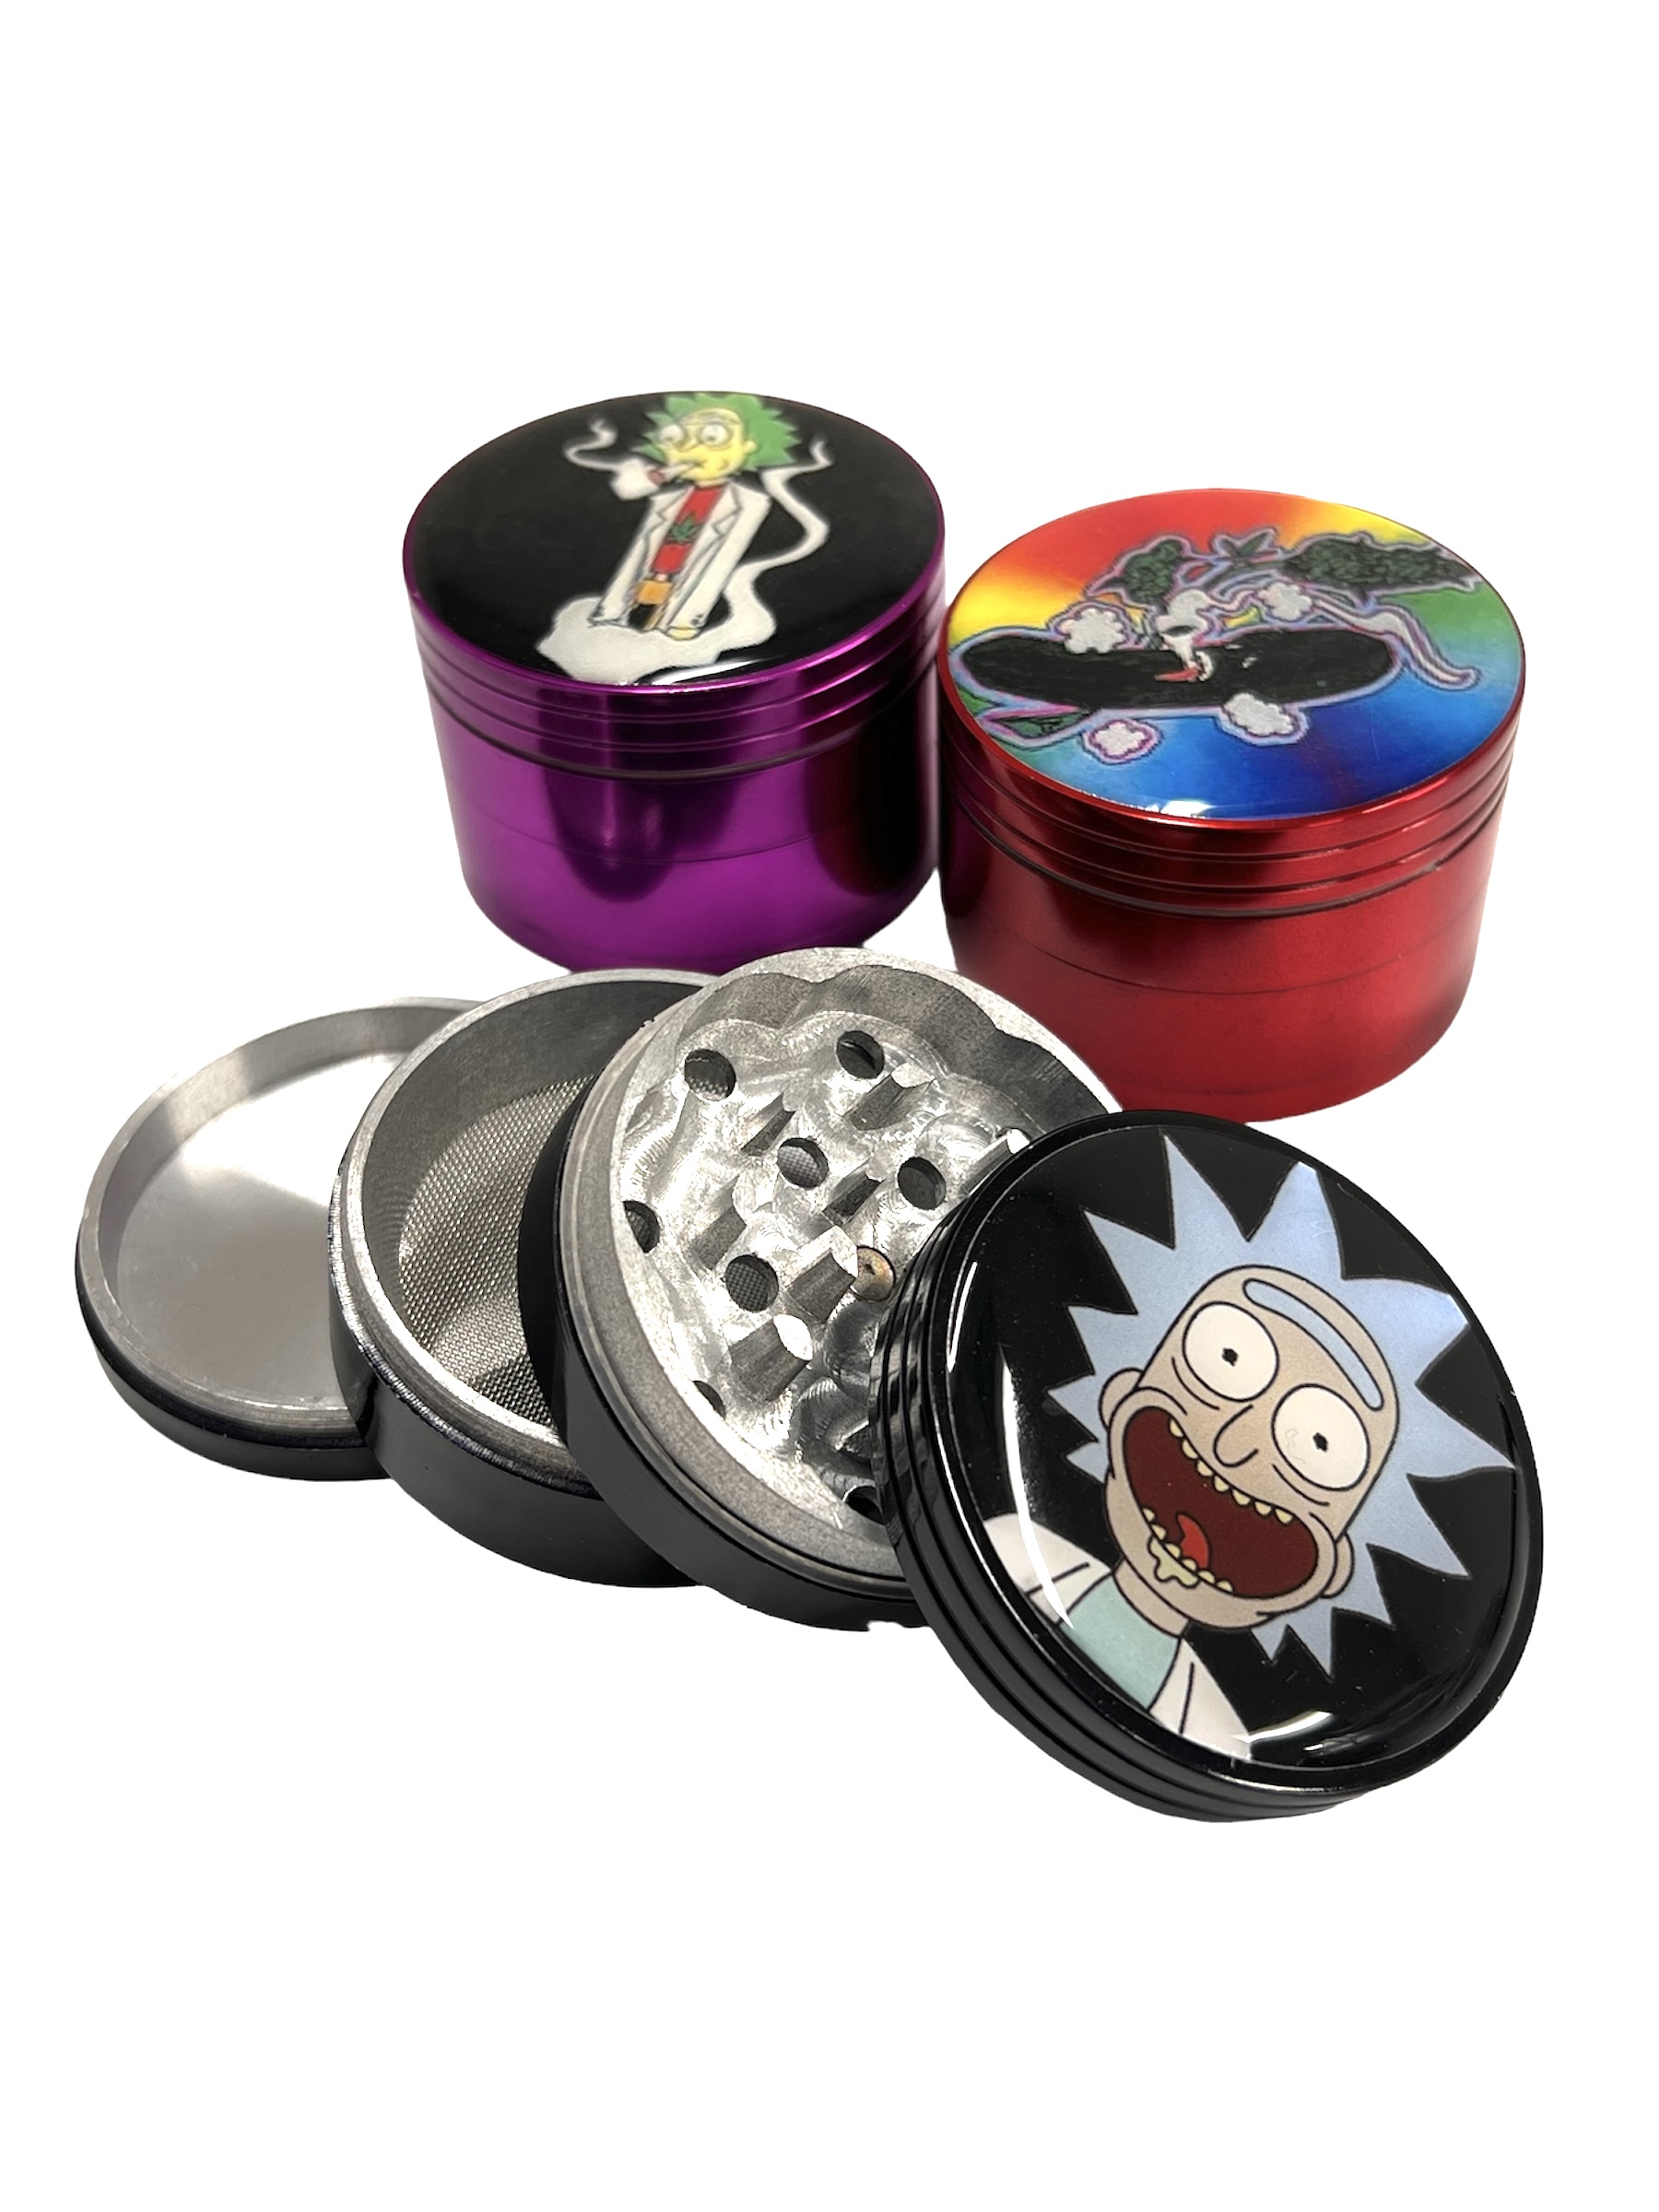 Rick & Morty, Yellow & Blue, 4 Part 50 mm Grinder — Rolling Buddy